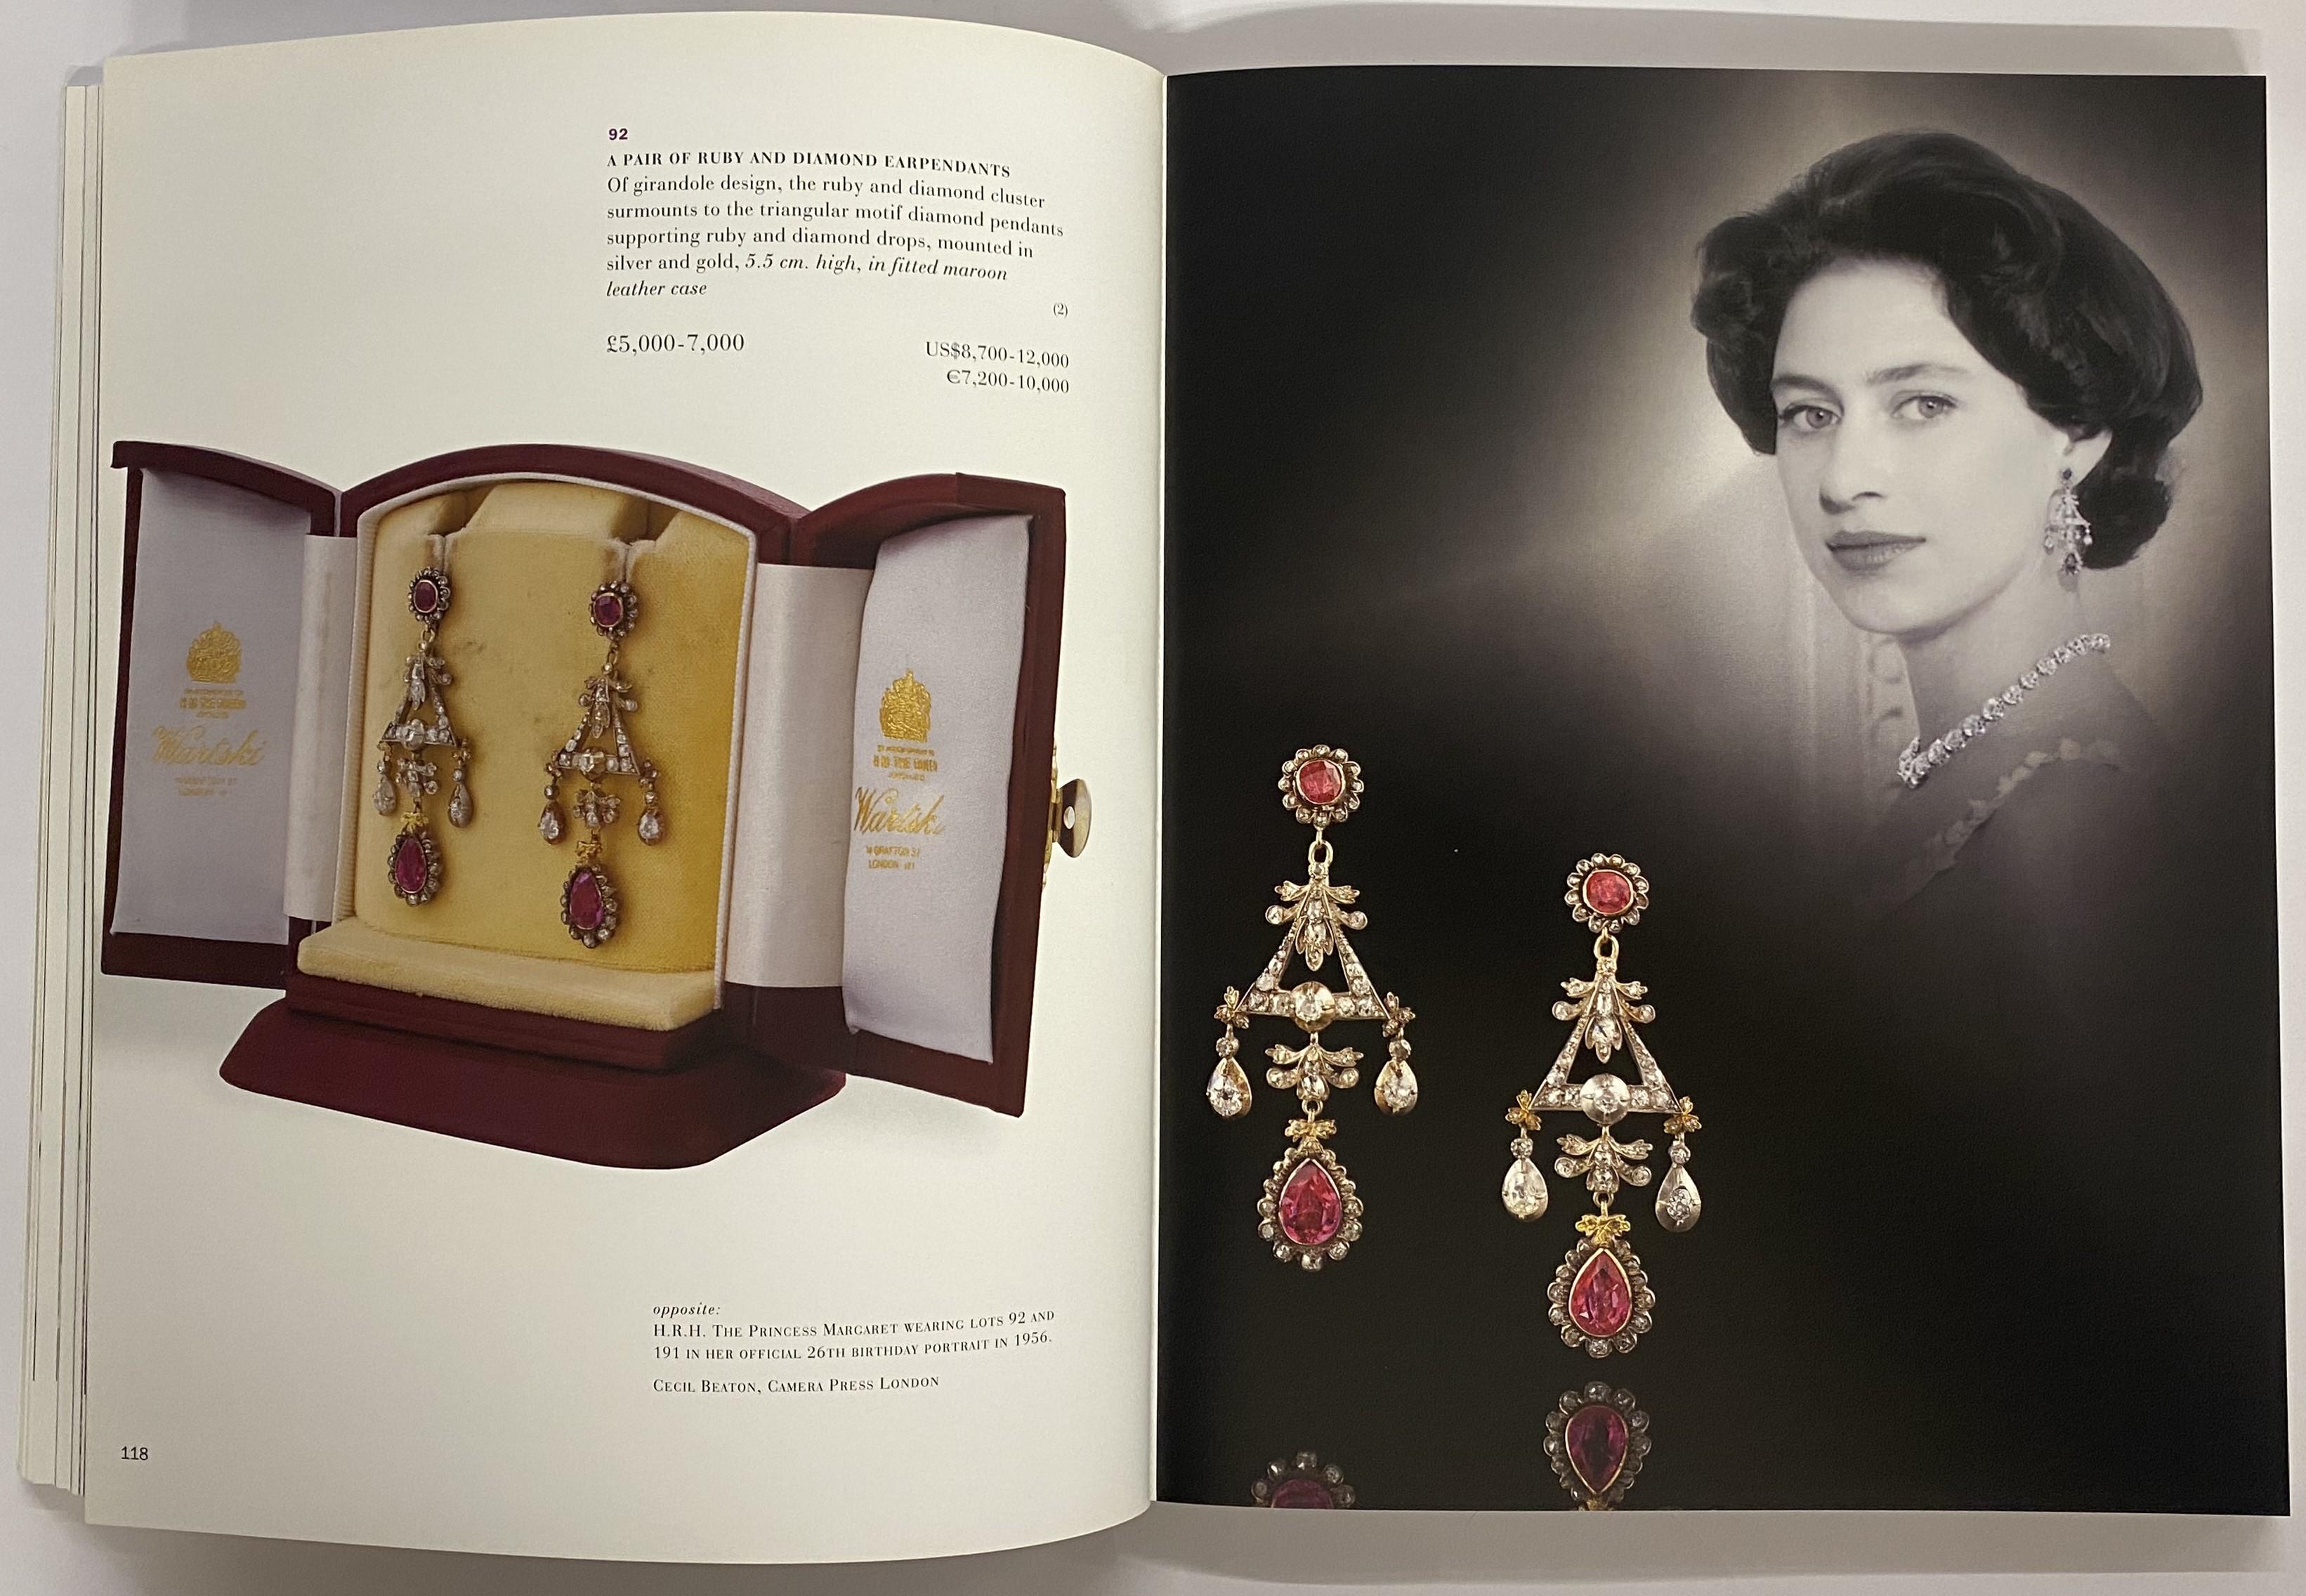 Paper Property from the Collection of Her Royal Highness The Princess Margaret (Book) For Sale